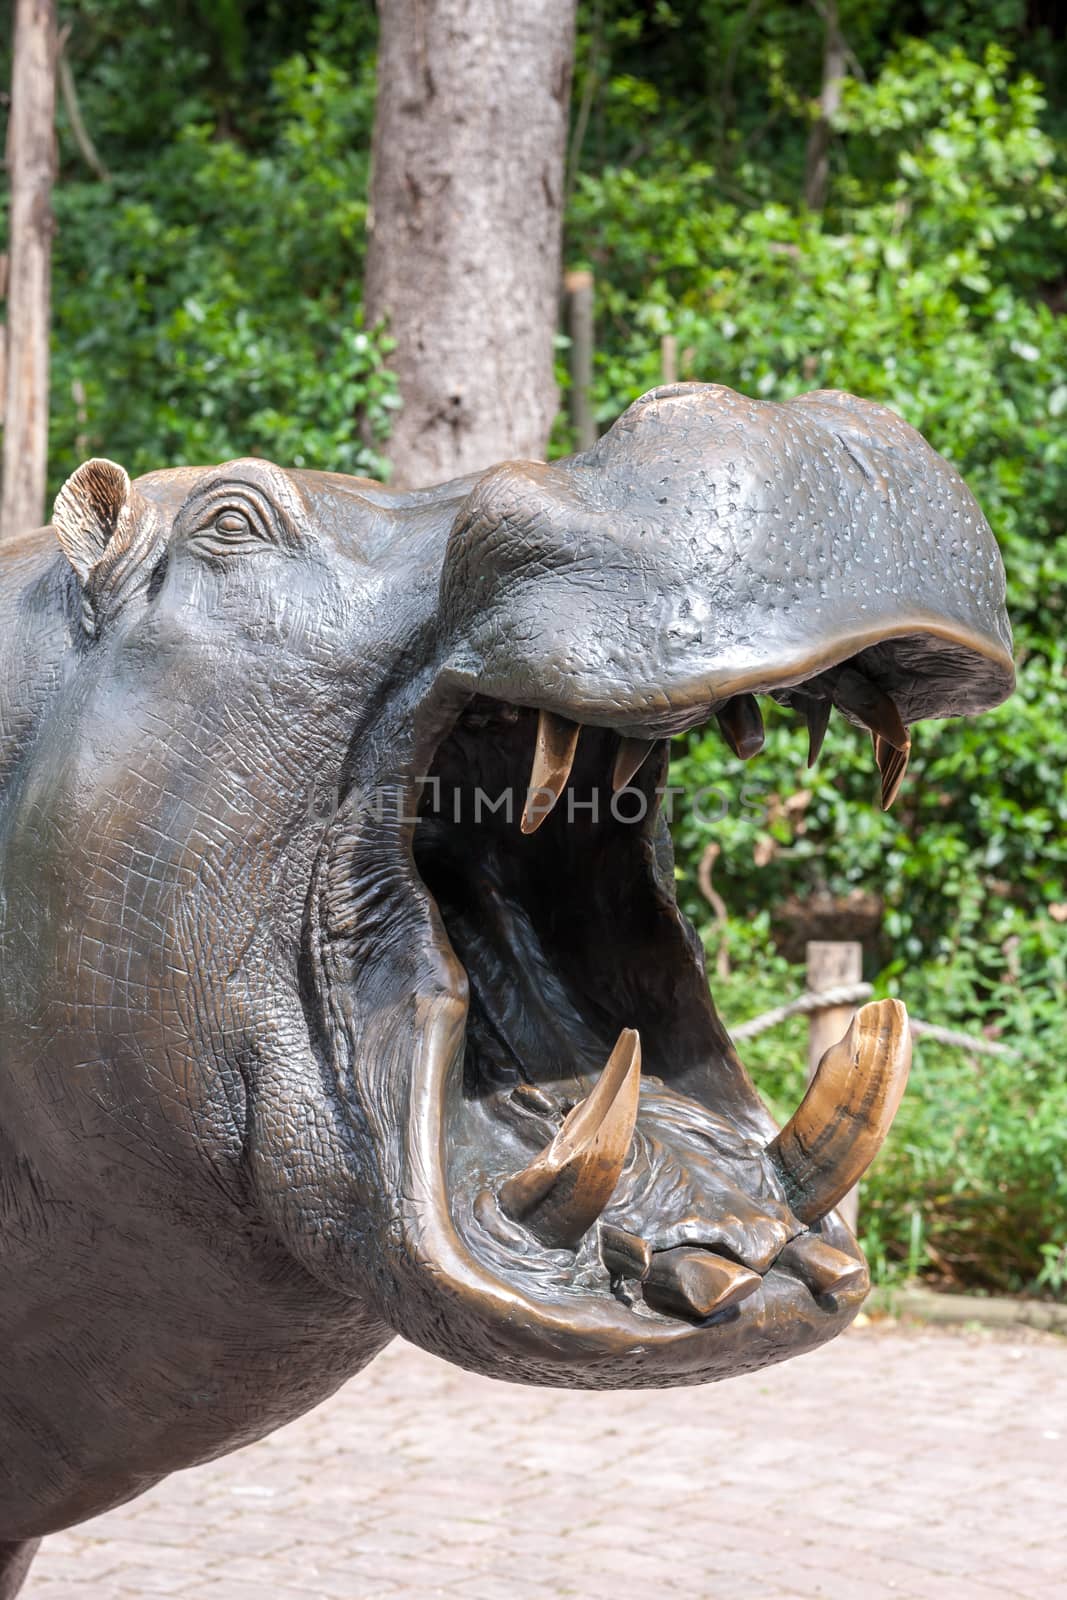 Hippopotamus showing huge jaw and teeth. sculpture at the zoo